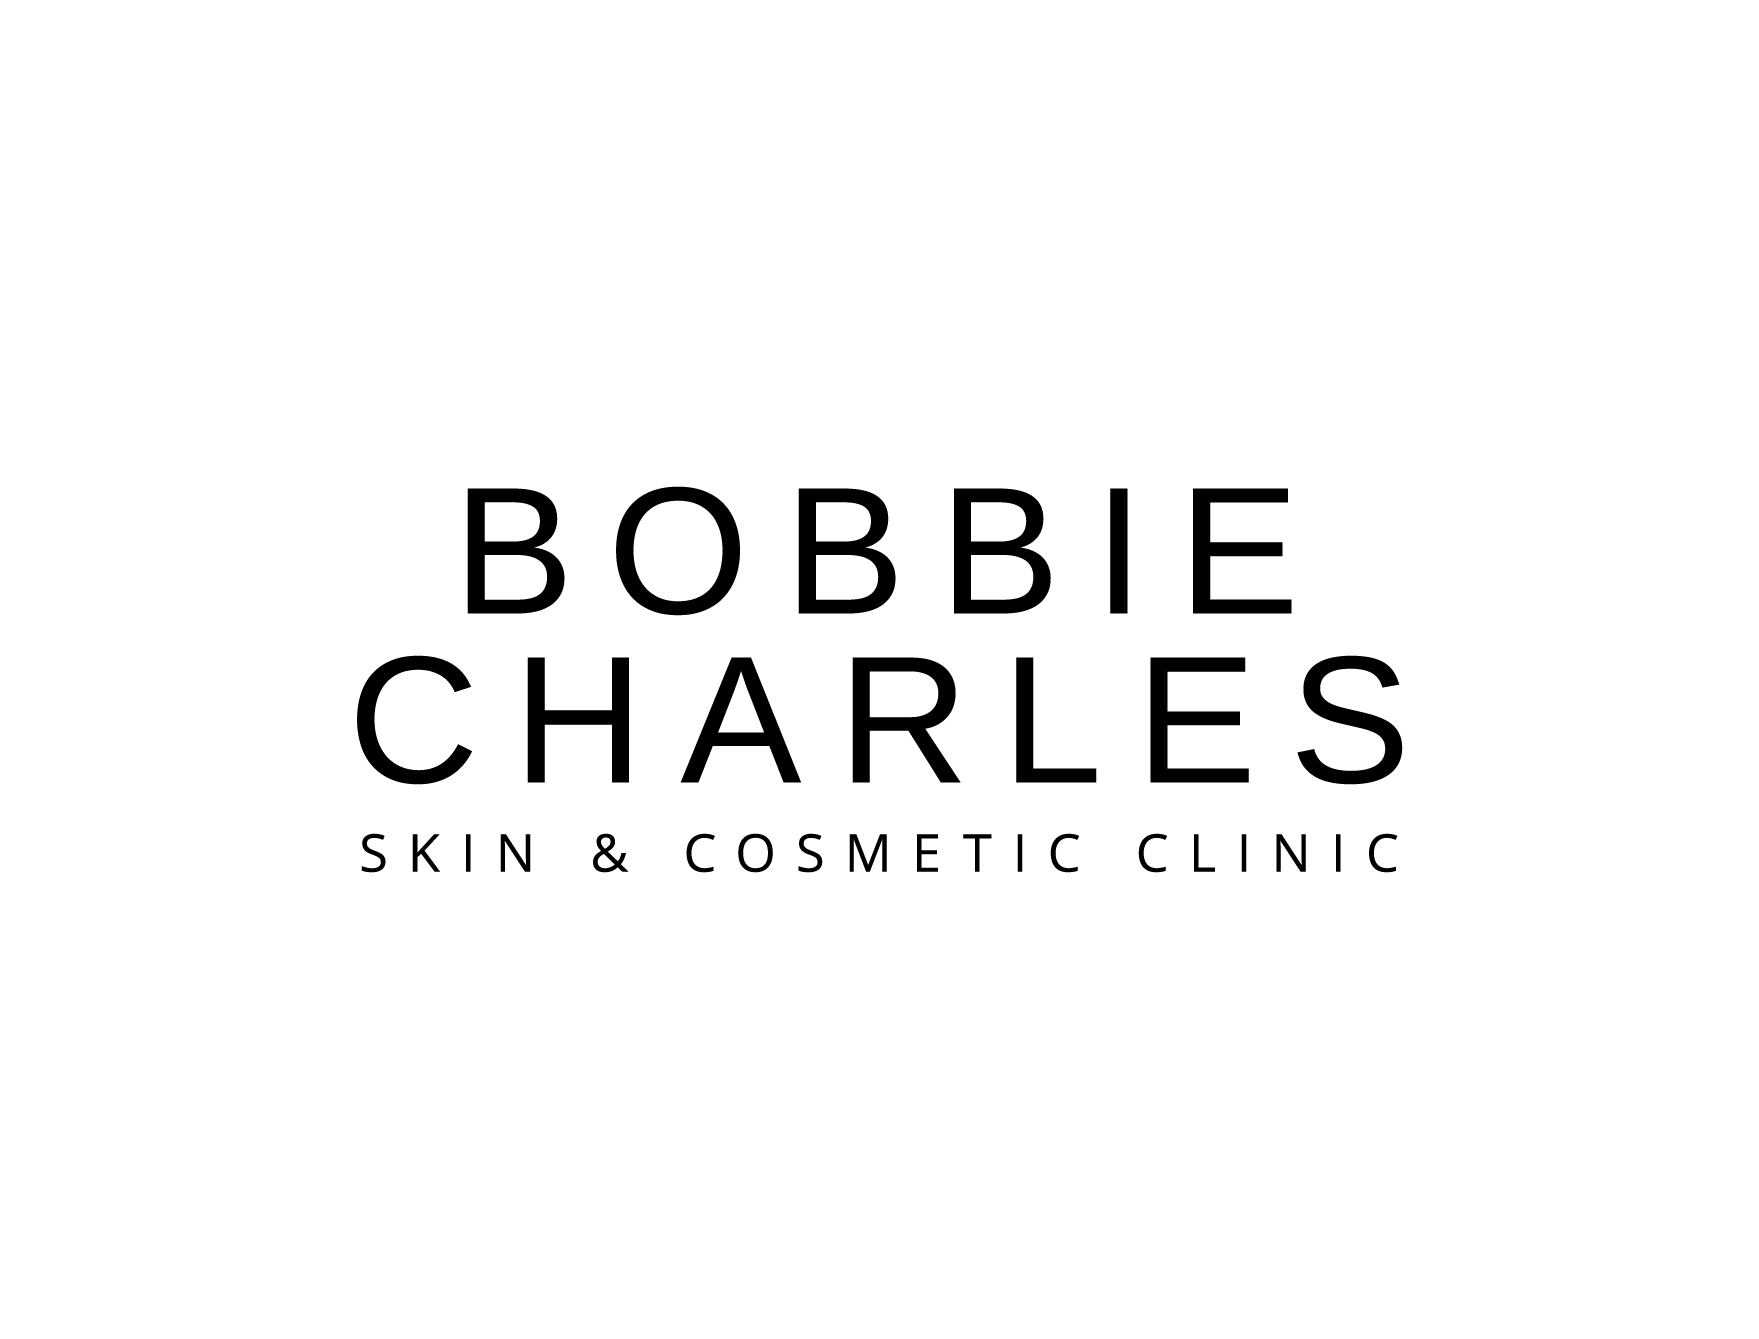 Bobbie Charles Skin and Cosmetic Clinic